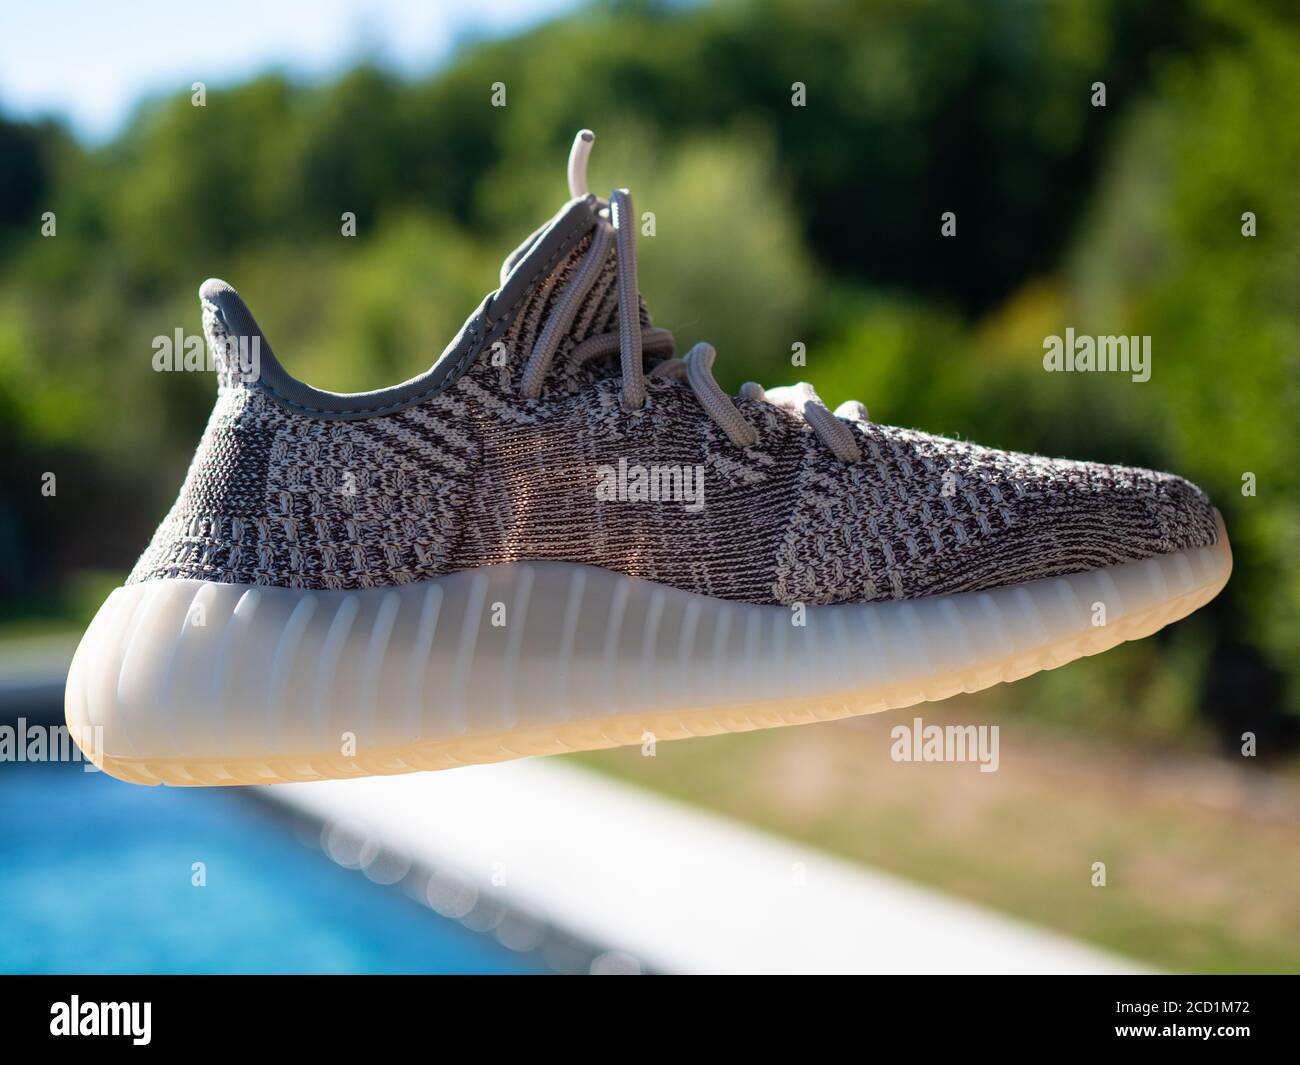 yeezy boost august